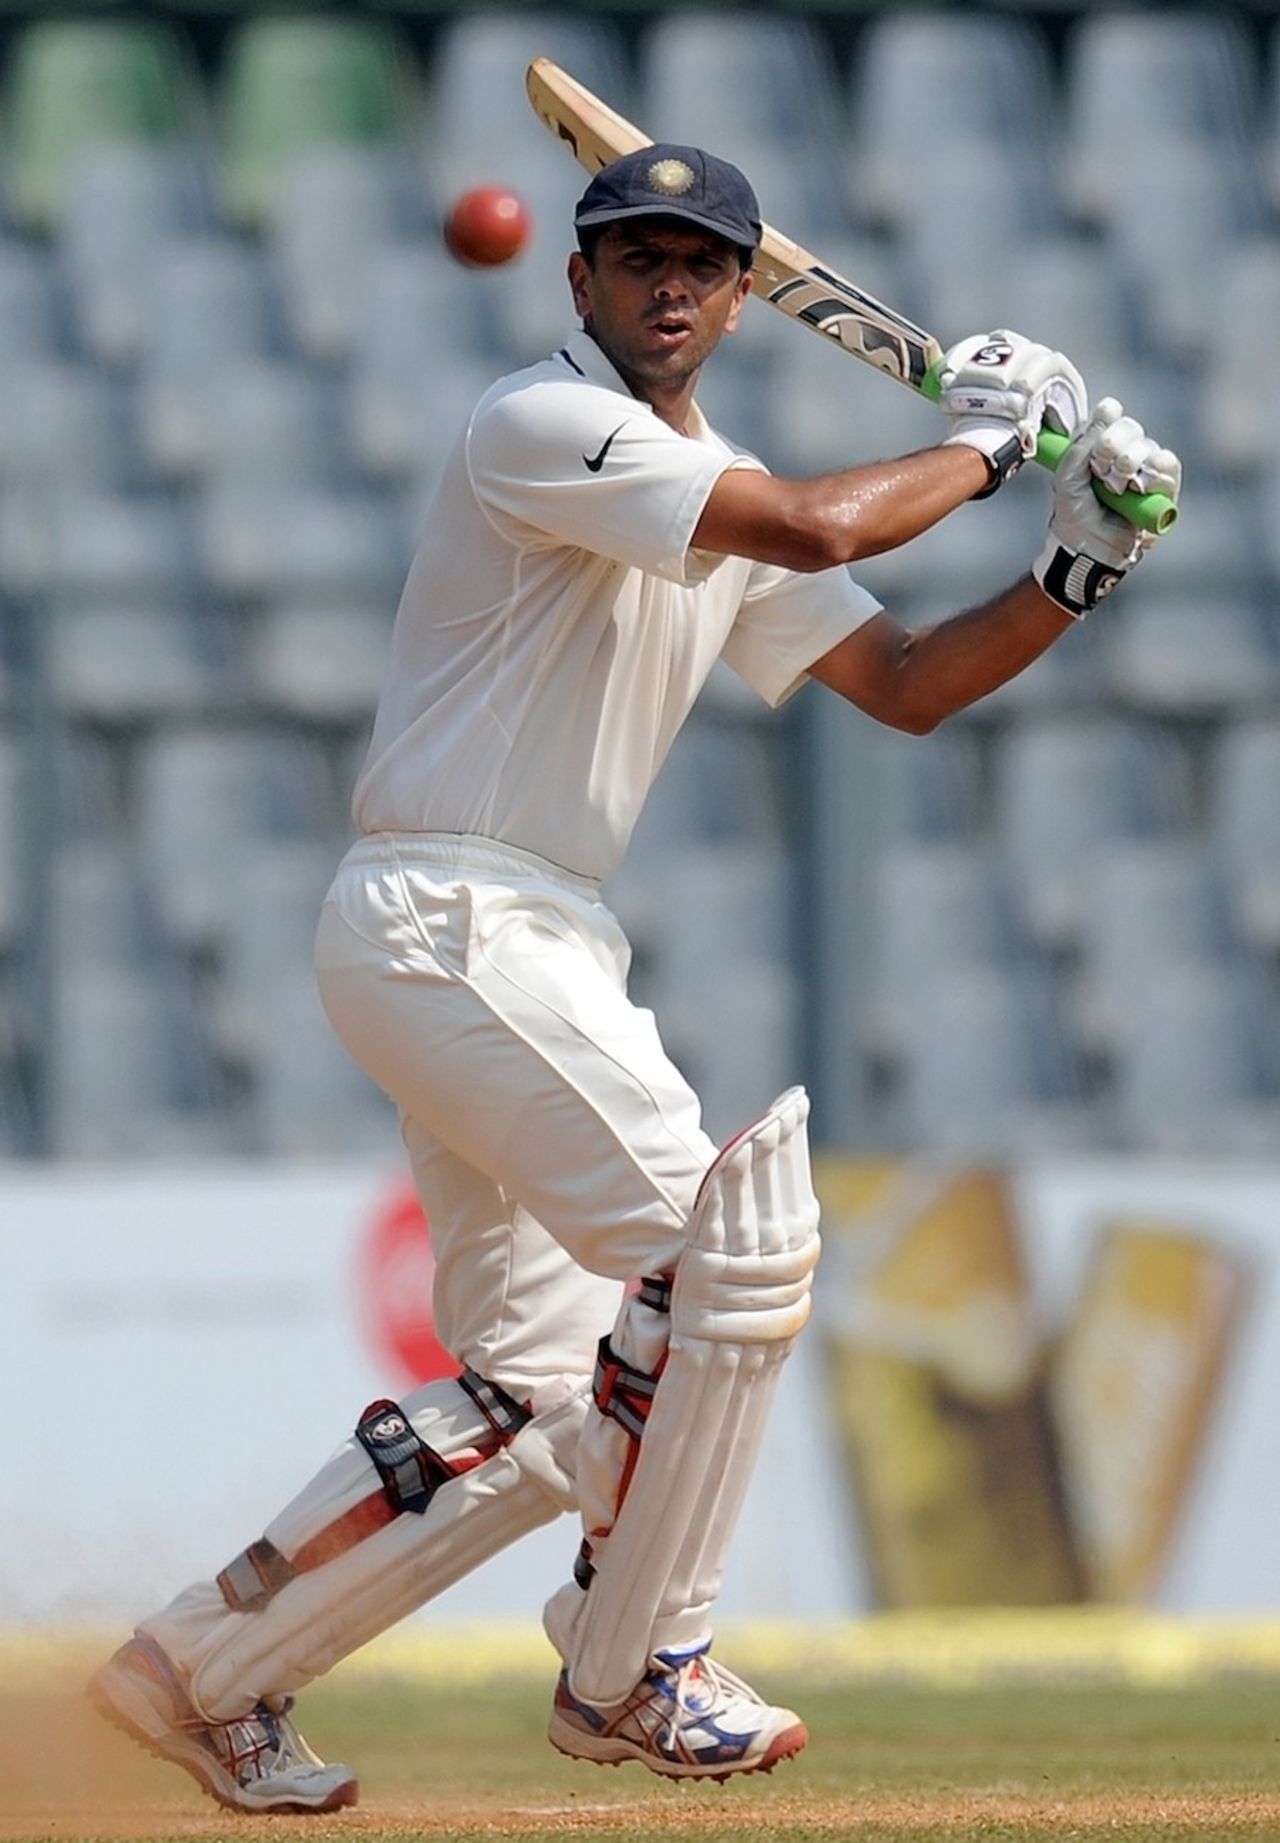 Rahul Dravid contributed 33 to India's chase, India v West Indies, 3rd Test, Mumbai, 5th day, November 26, 2011 